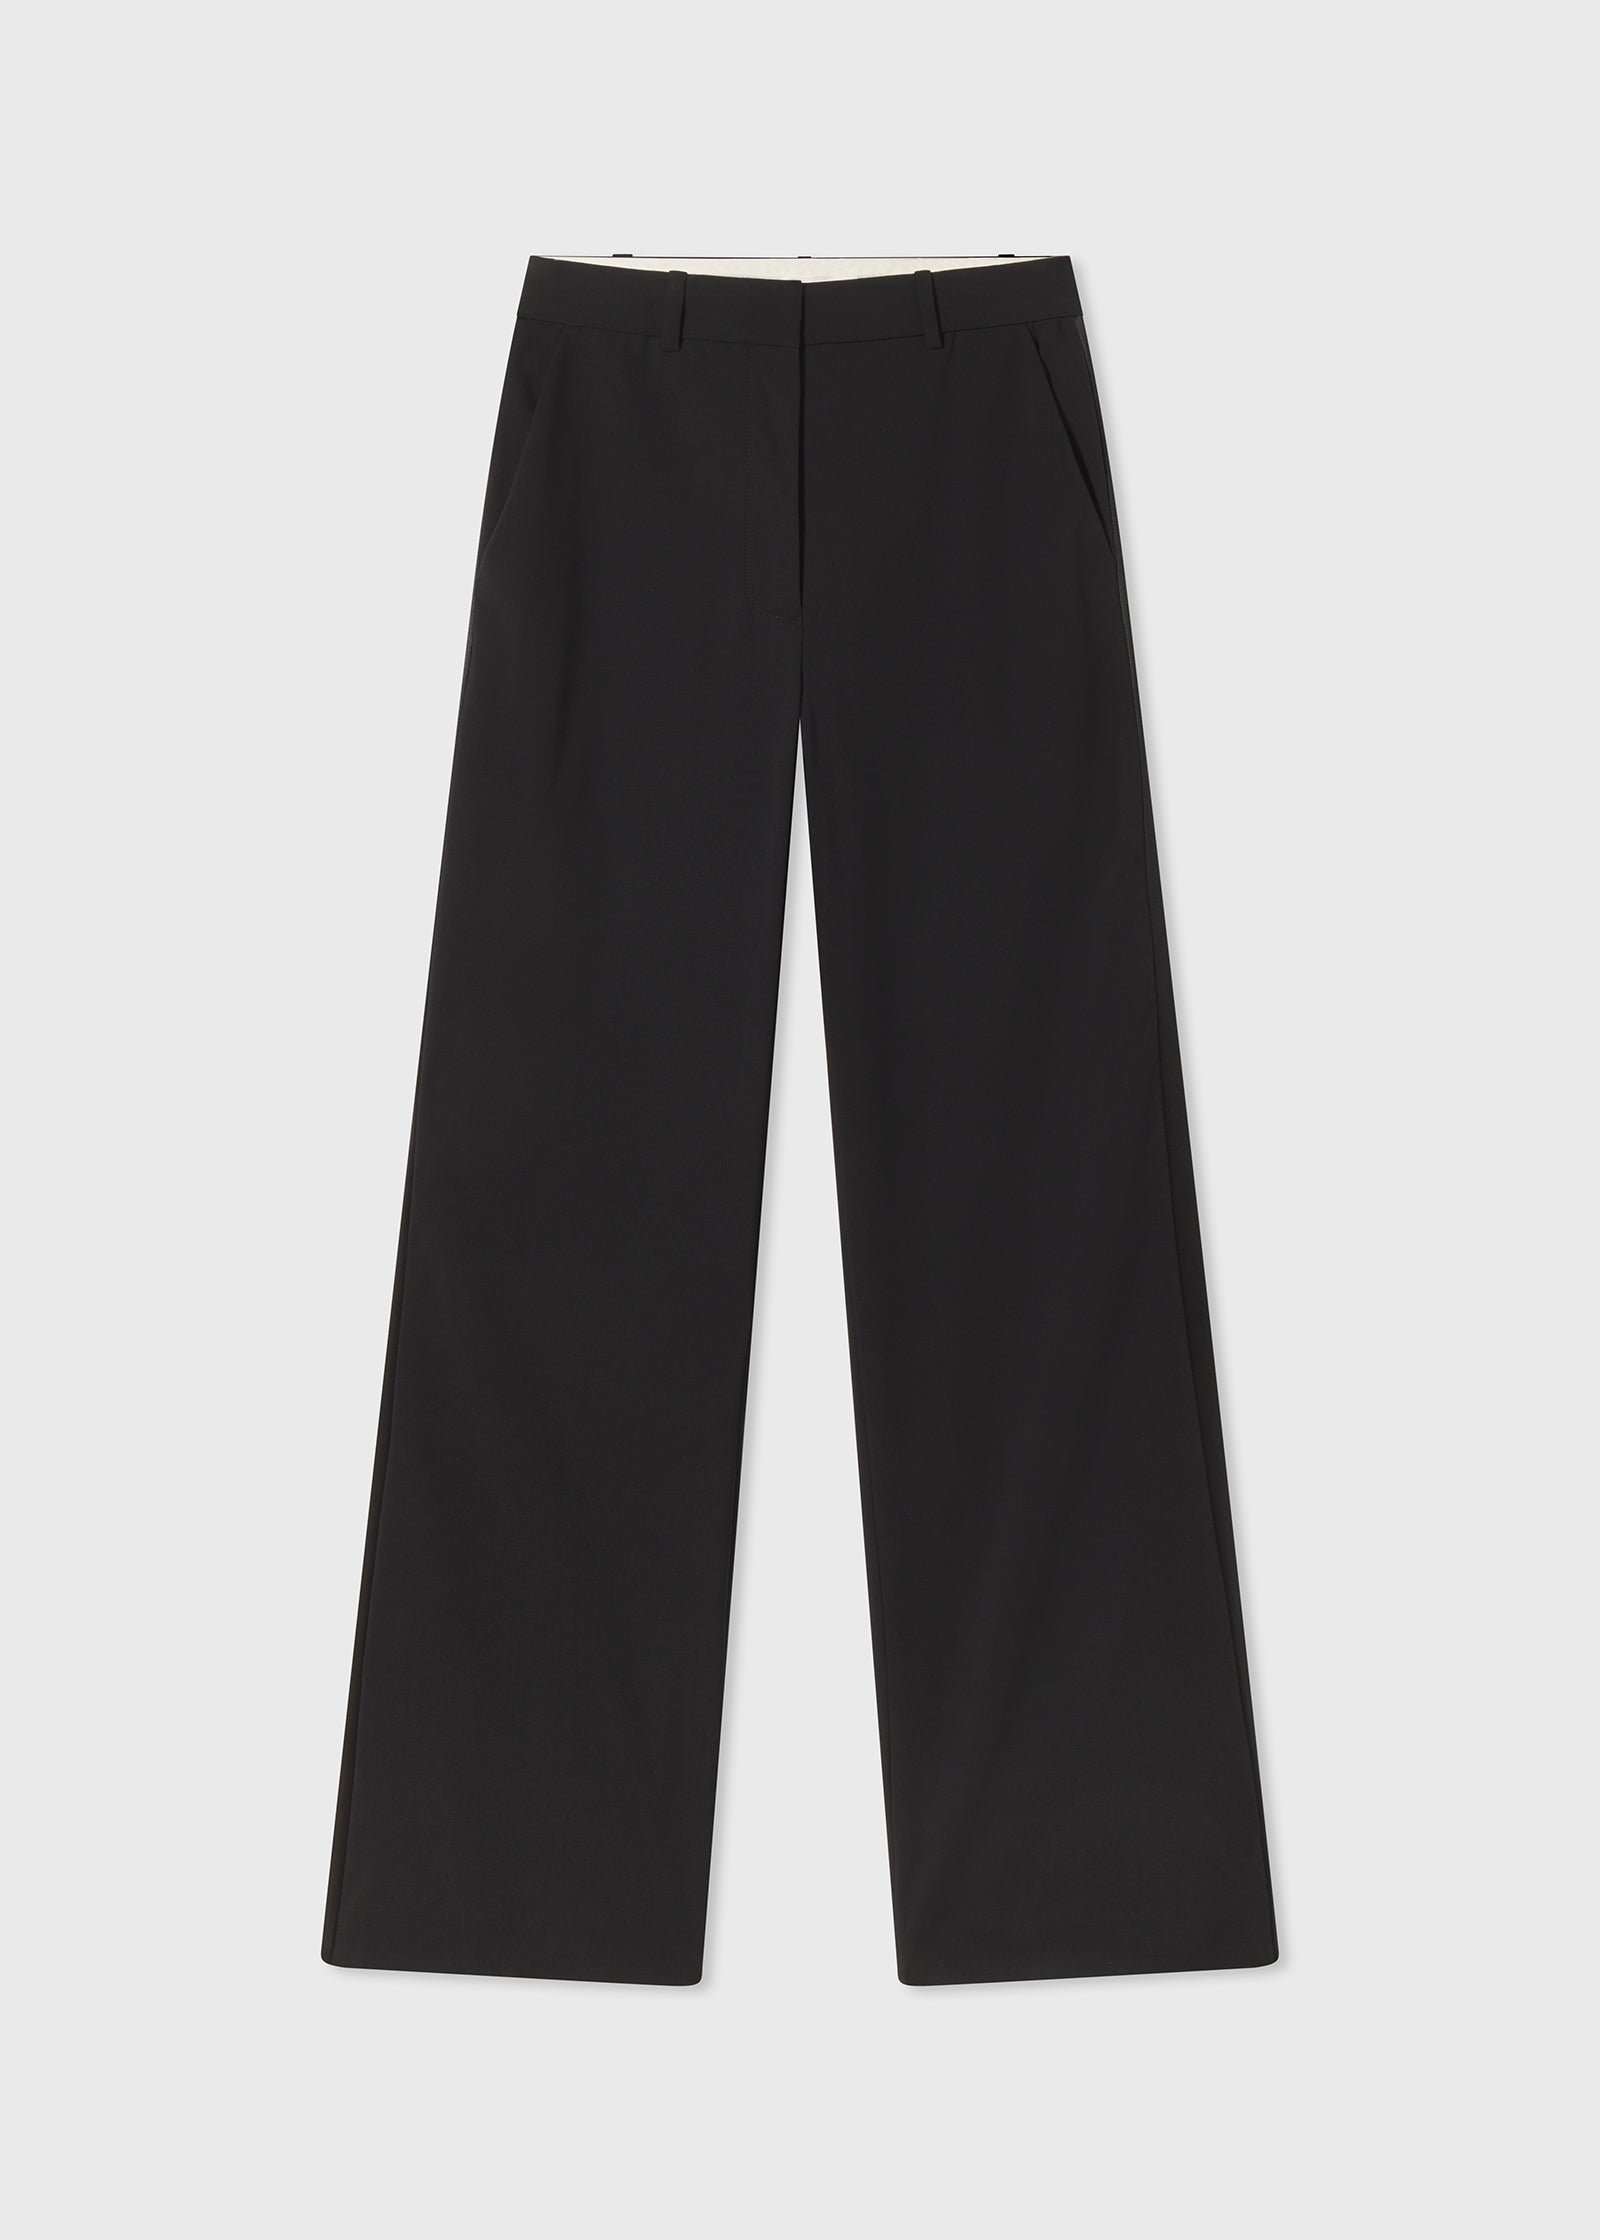 Tuxedo Pant in Wool and SIlk - Black - CO Collections